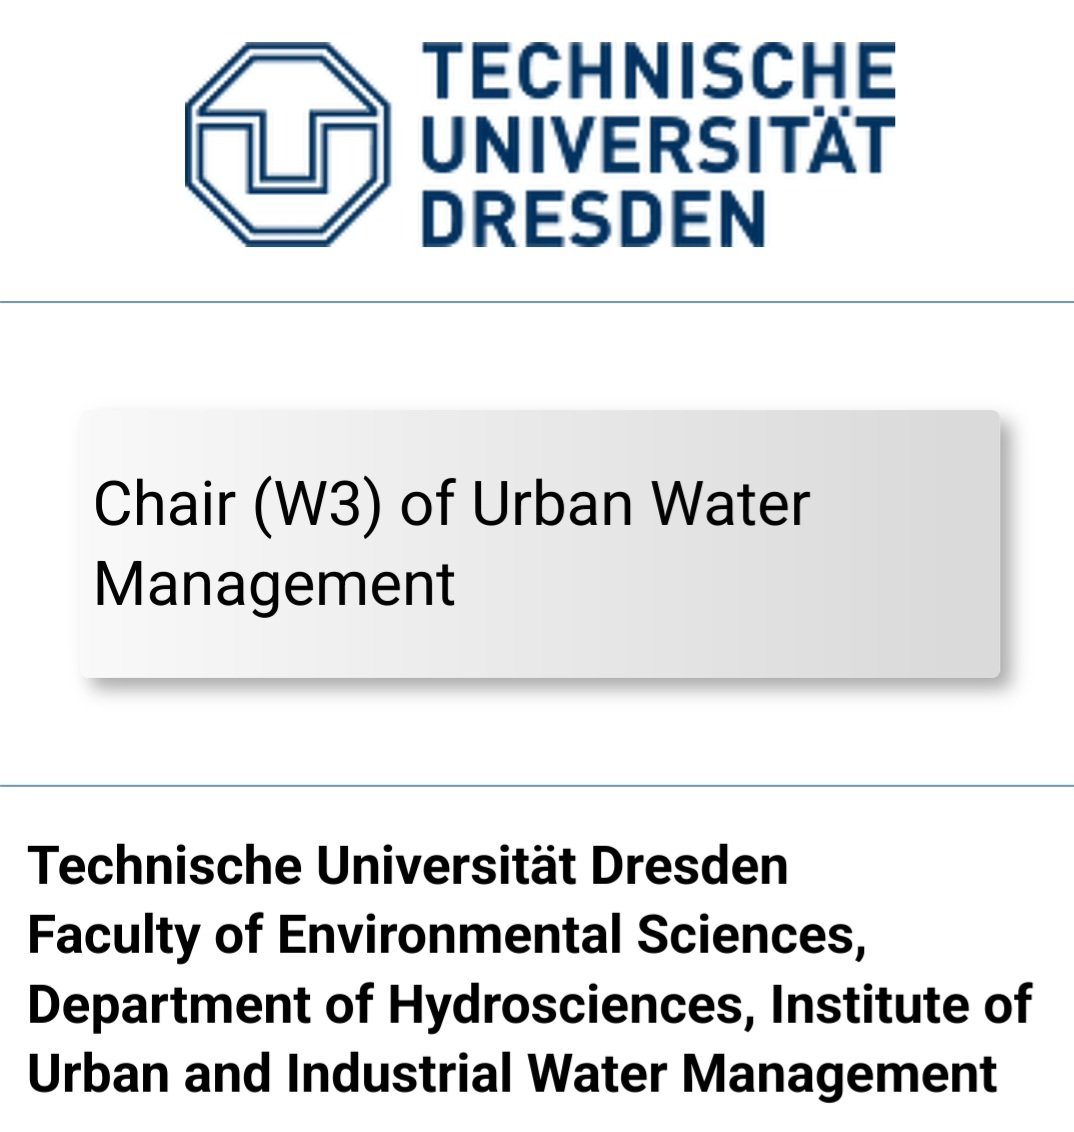 A full professor position for urban water management at our department of Hydrosciences @tudresden_de! Onpy one more day to apply: m.dresden-concept-jobs.de/#/en/offers/17…